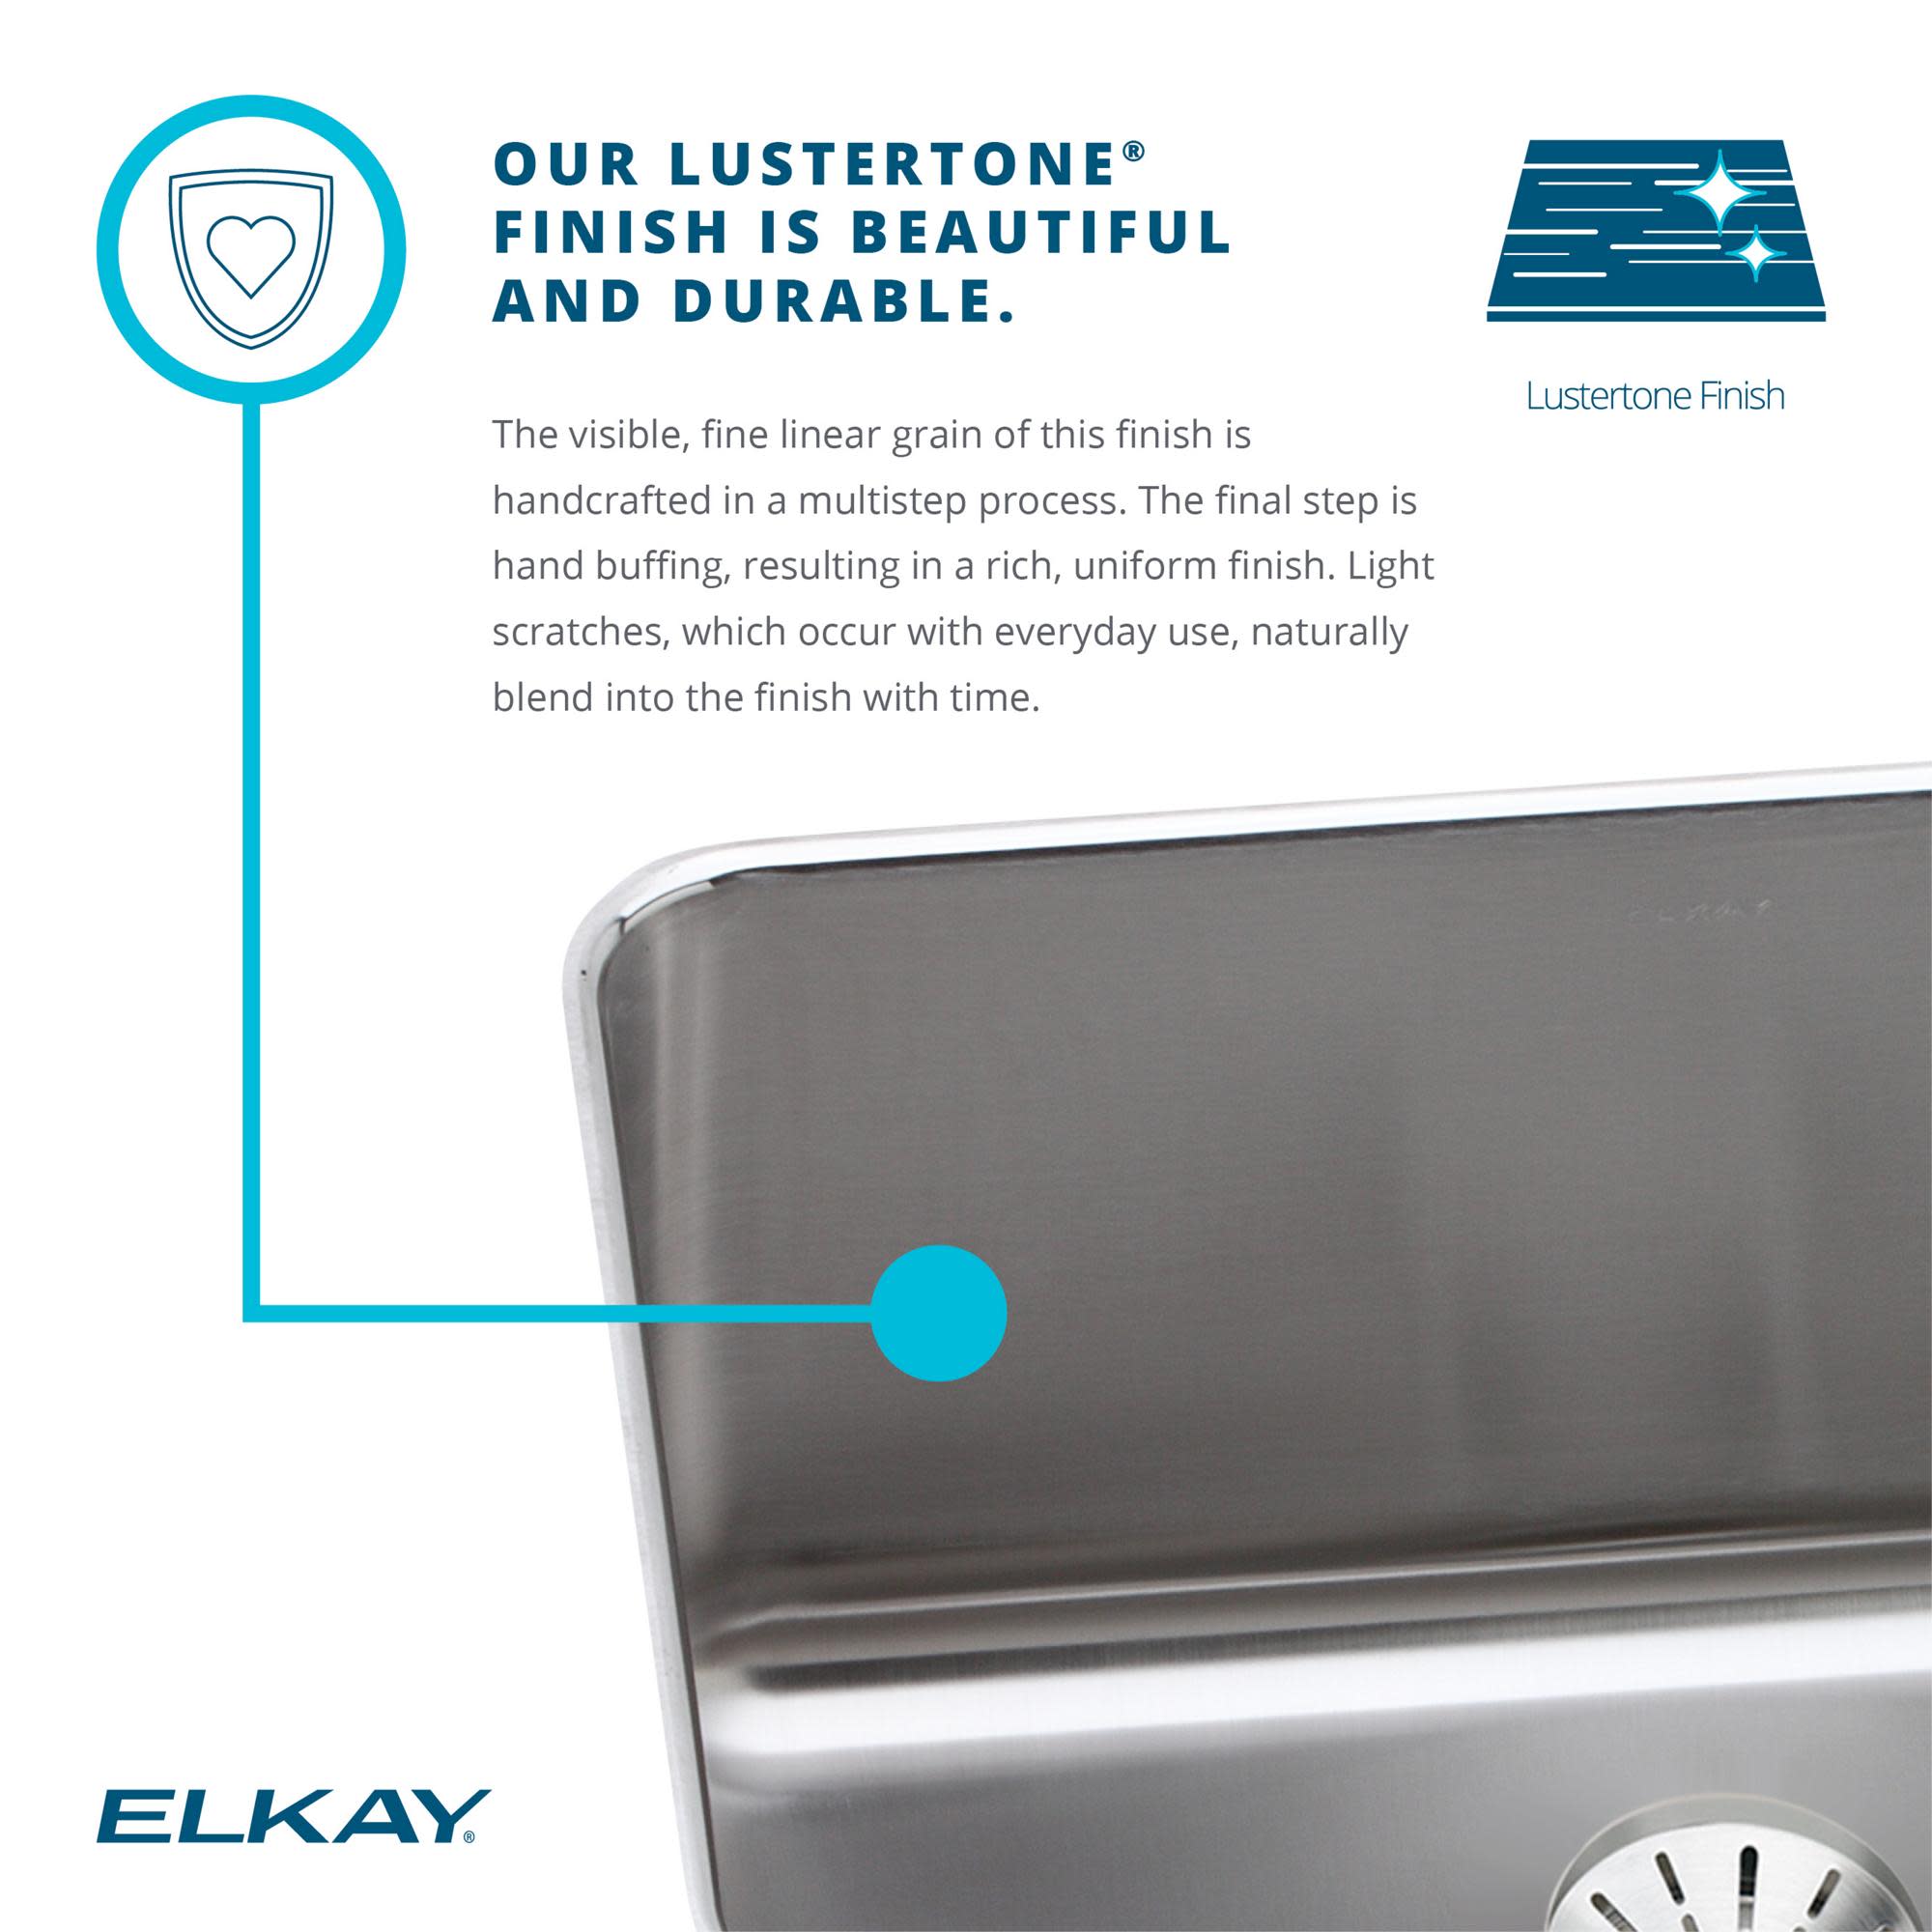 Elkay Lustertone LR2522PD0 Single Bowl Top Mount Stainless Steel Sink with Perfect Drain - 3